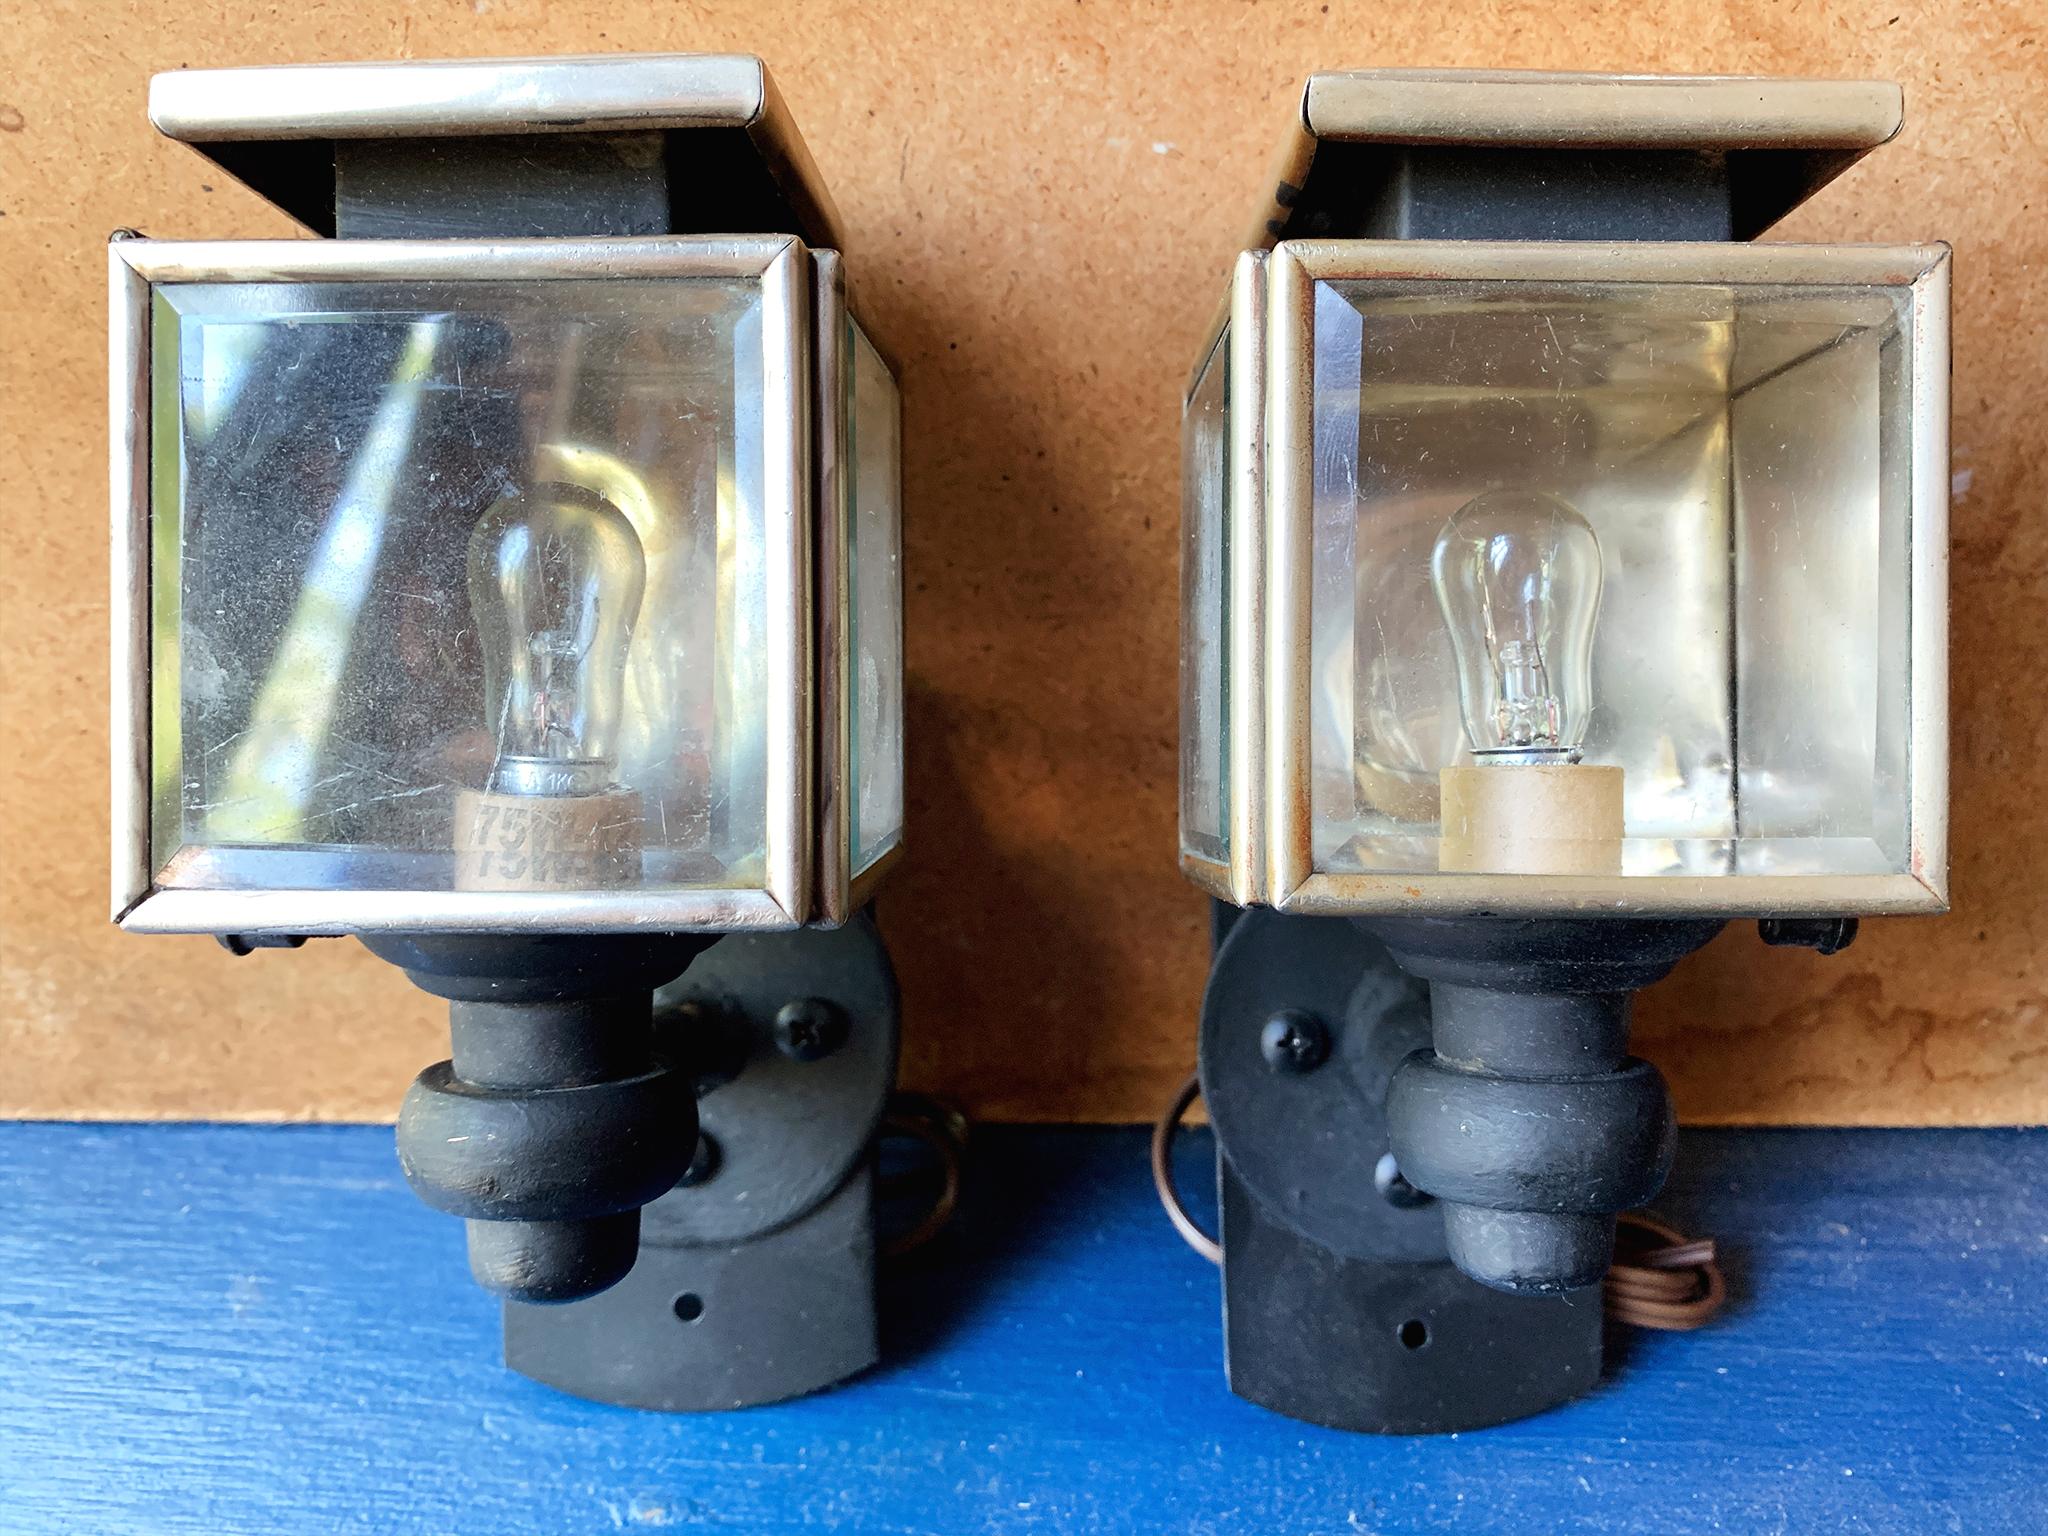 These two charming sconces are converted lights from a 1910s Studebaker automobile. They have metal frames with beveled glass covers and black-painted metal armature. The back plates are new, as well as the wiring.

Dimensions:
3.5 in. width
3.5